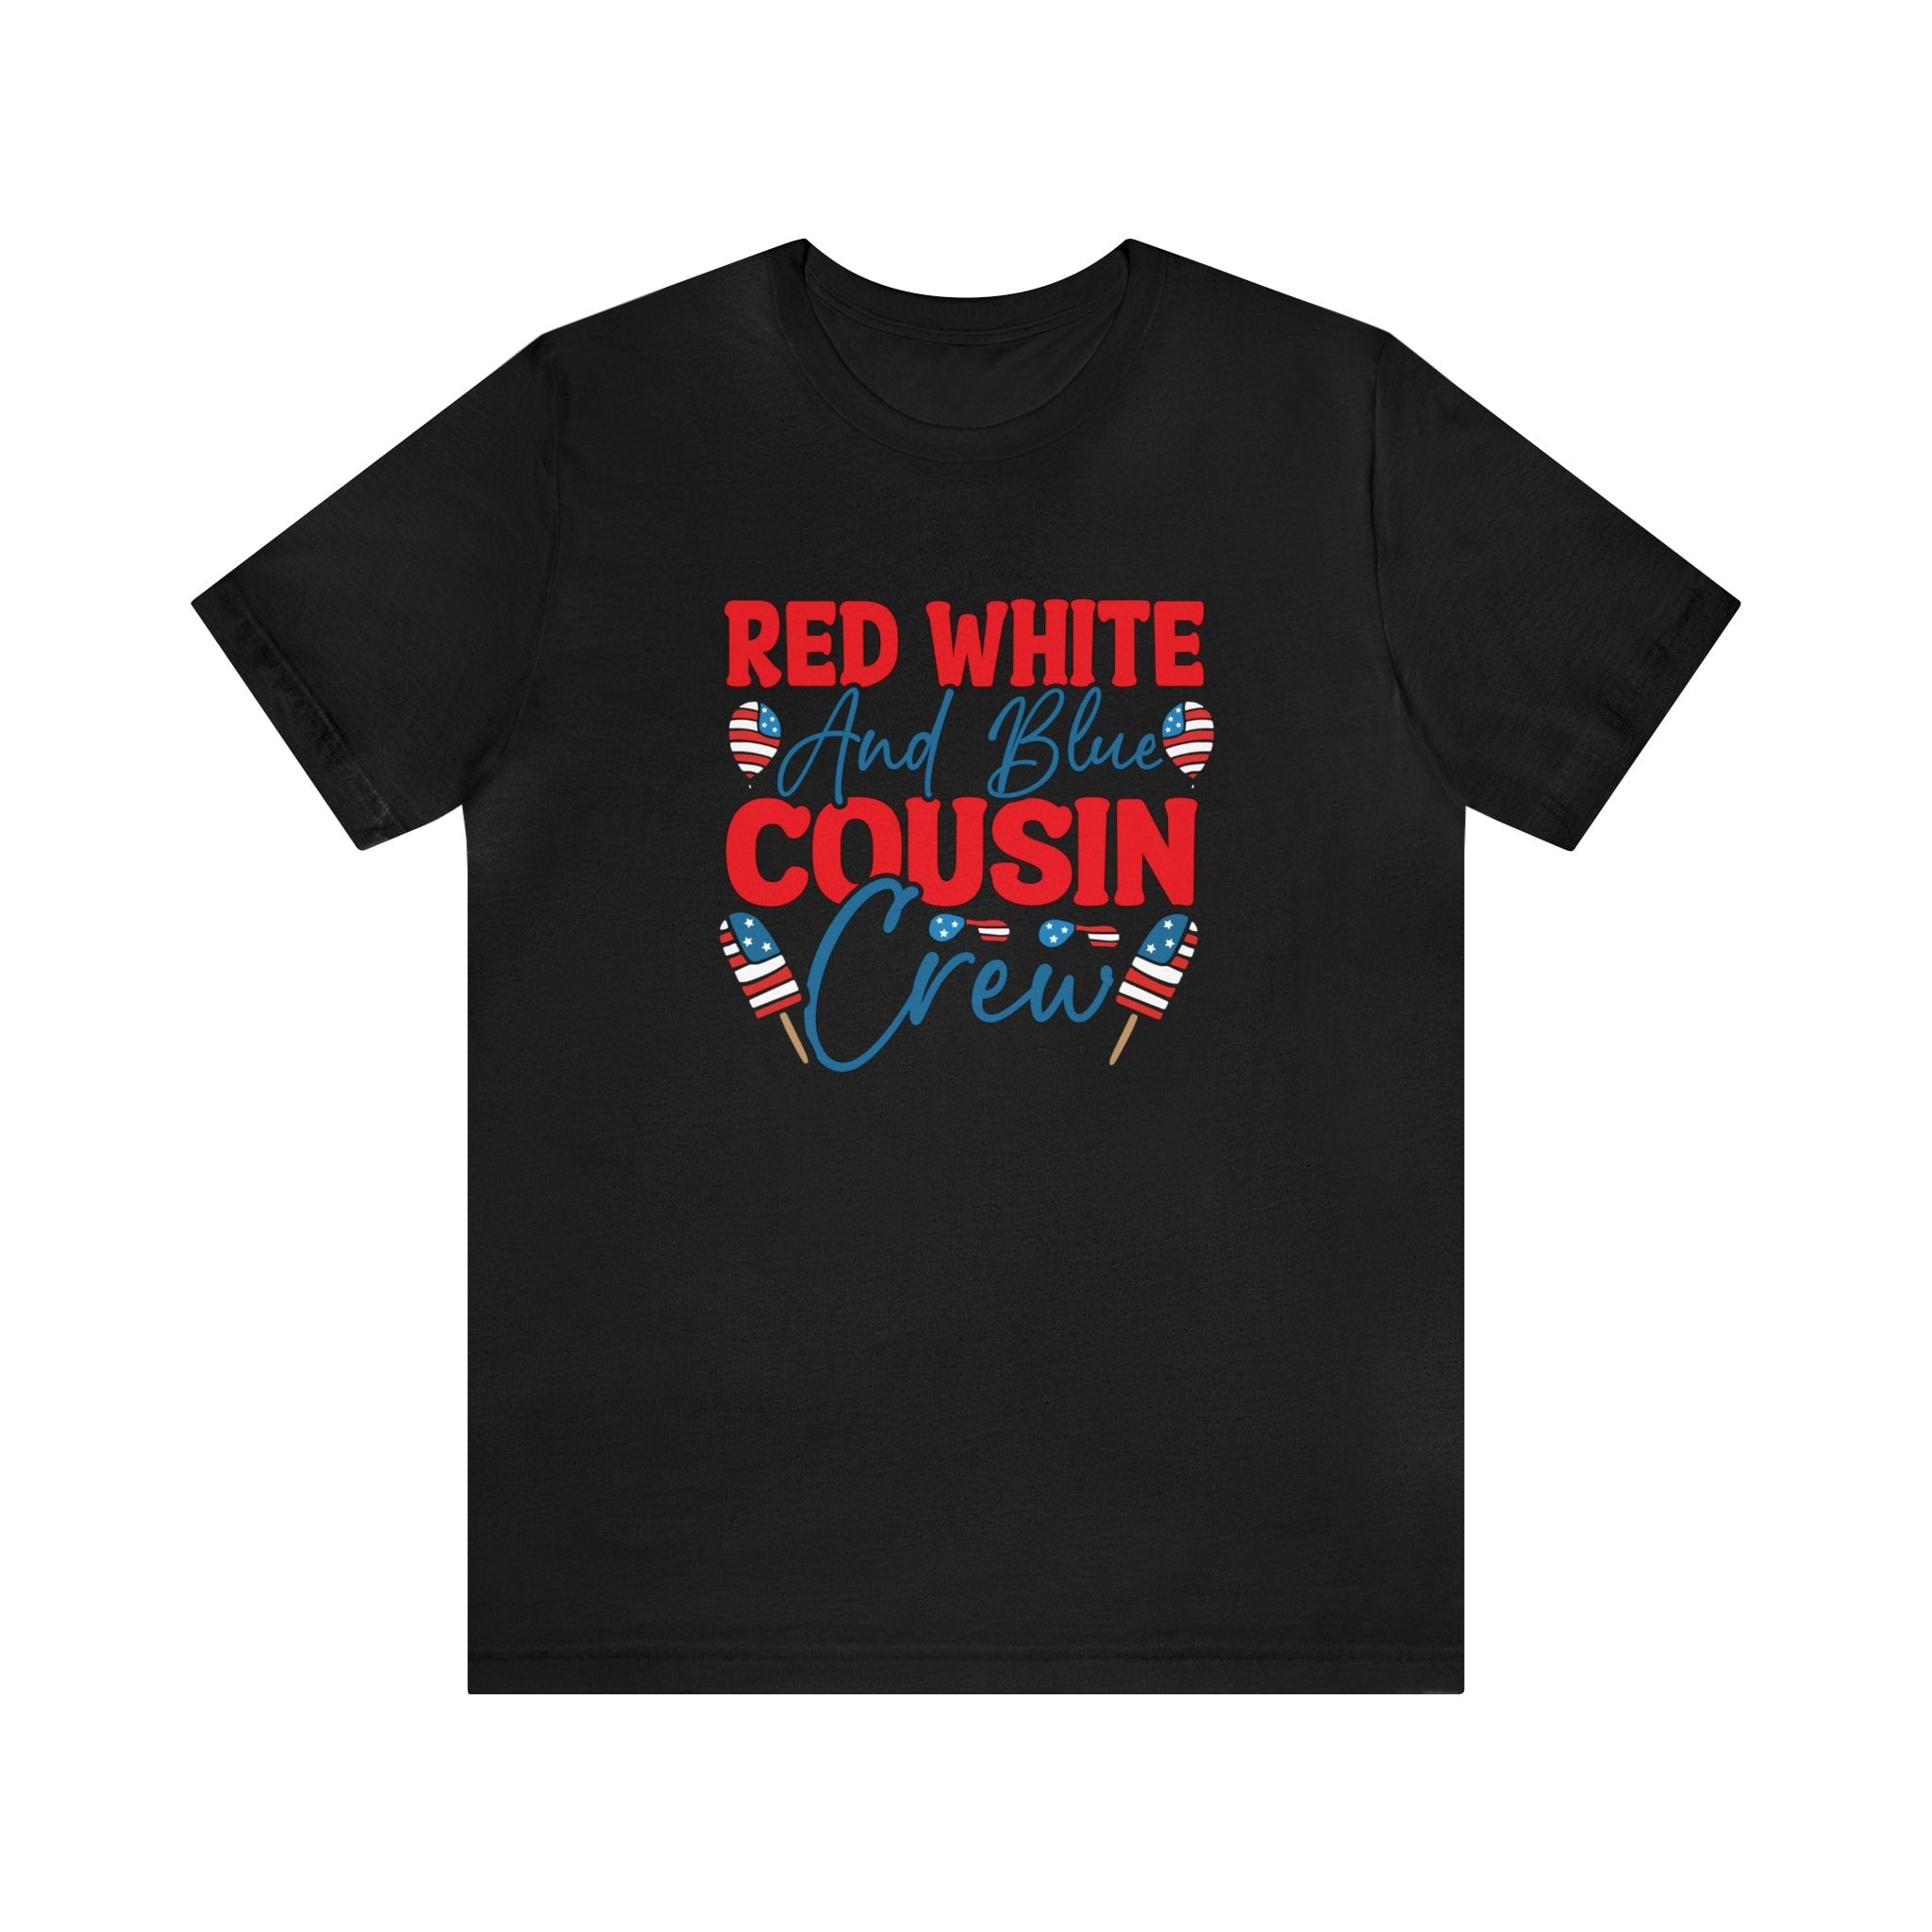 Red, White and blue Cousin Crew Printify